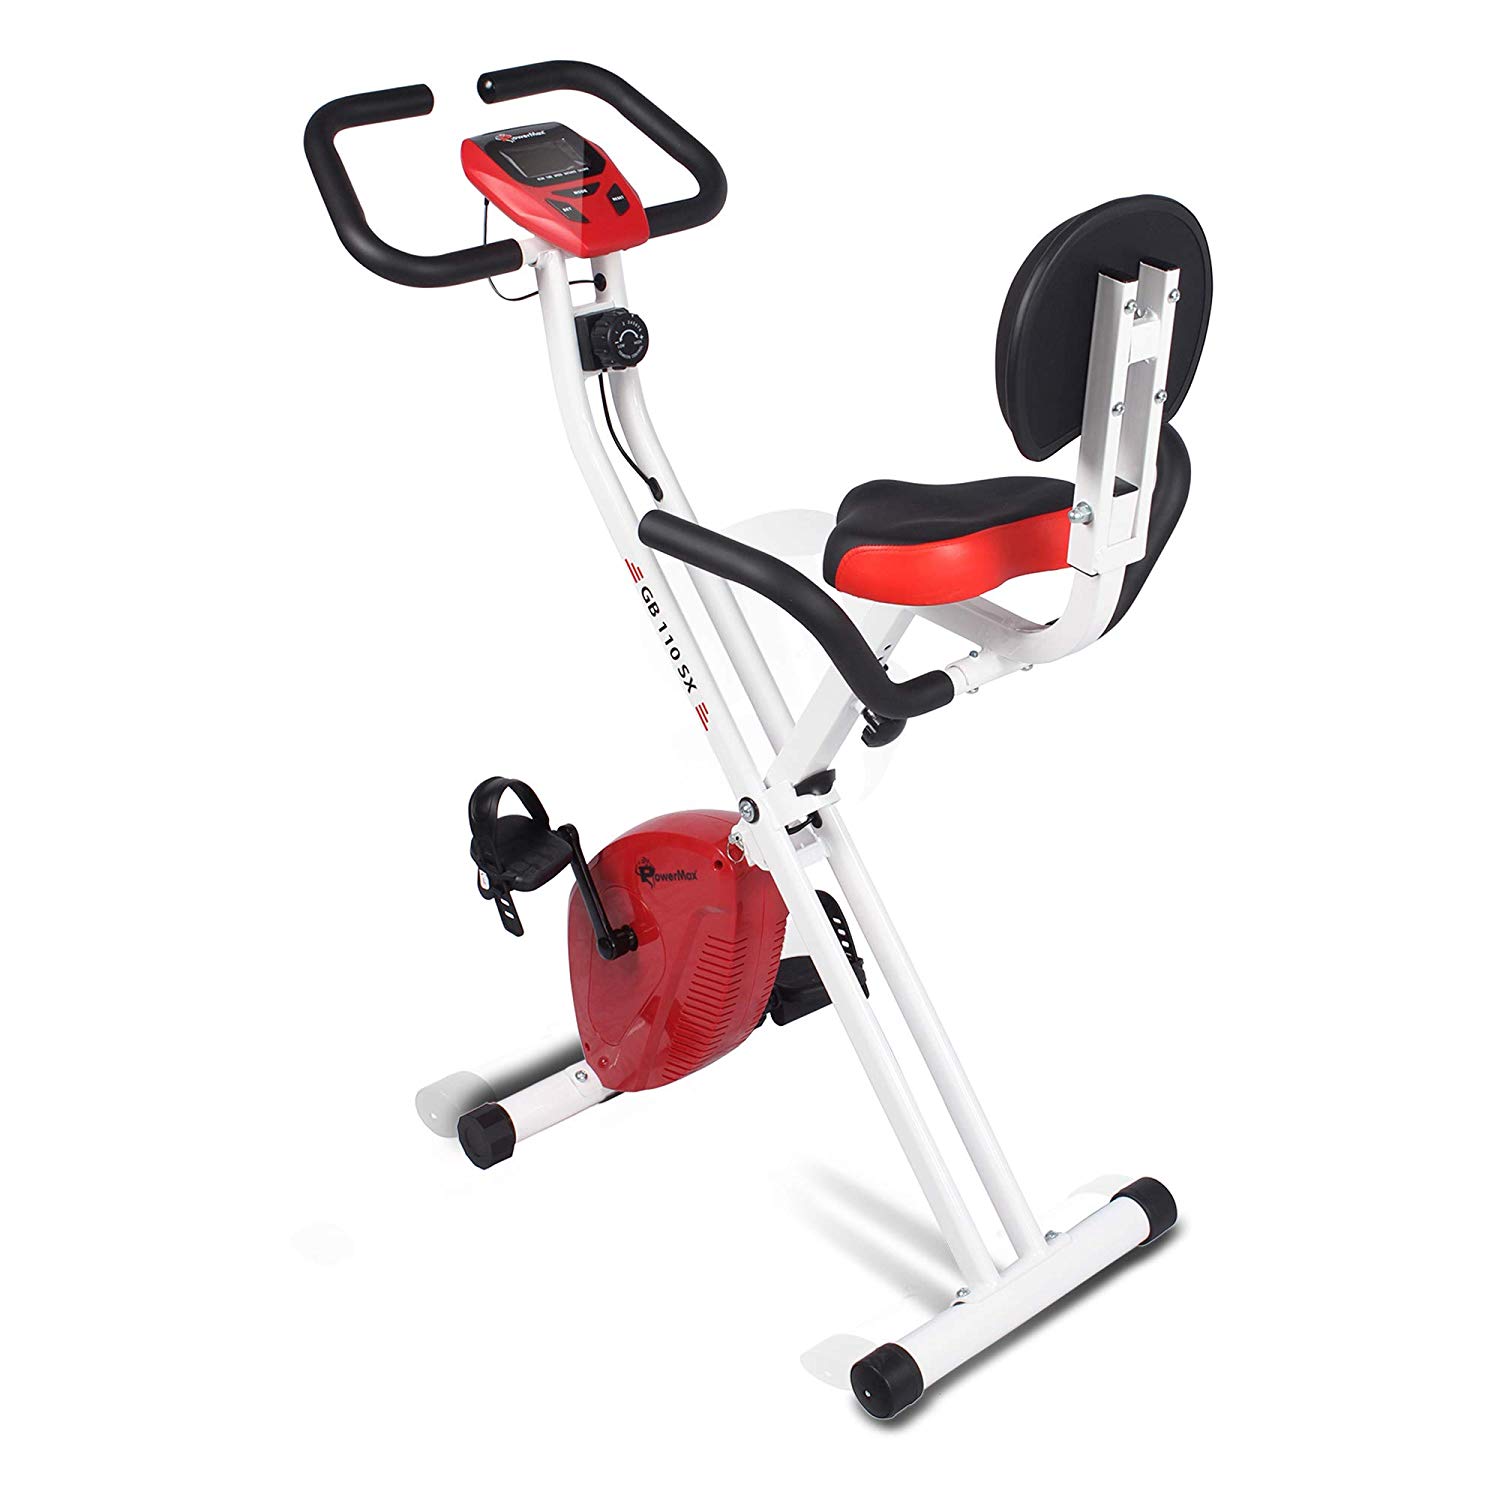 Powermax fitness BX-110SX - upright exercise bike with programs